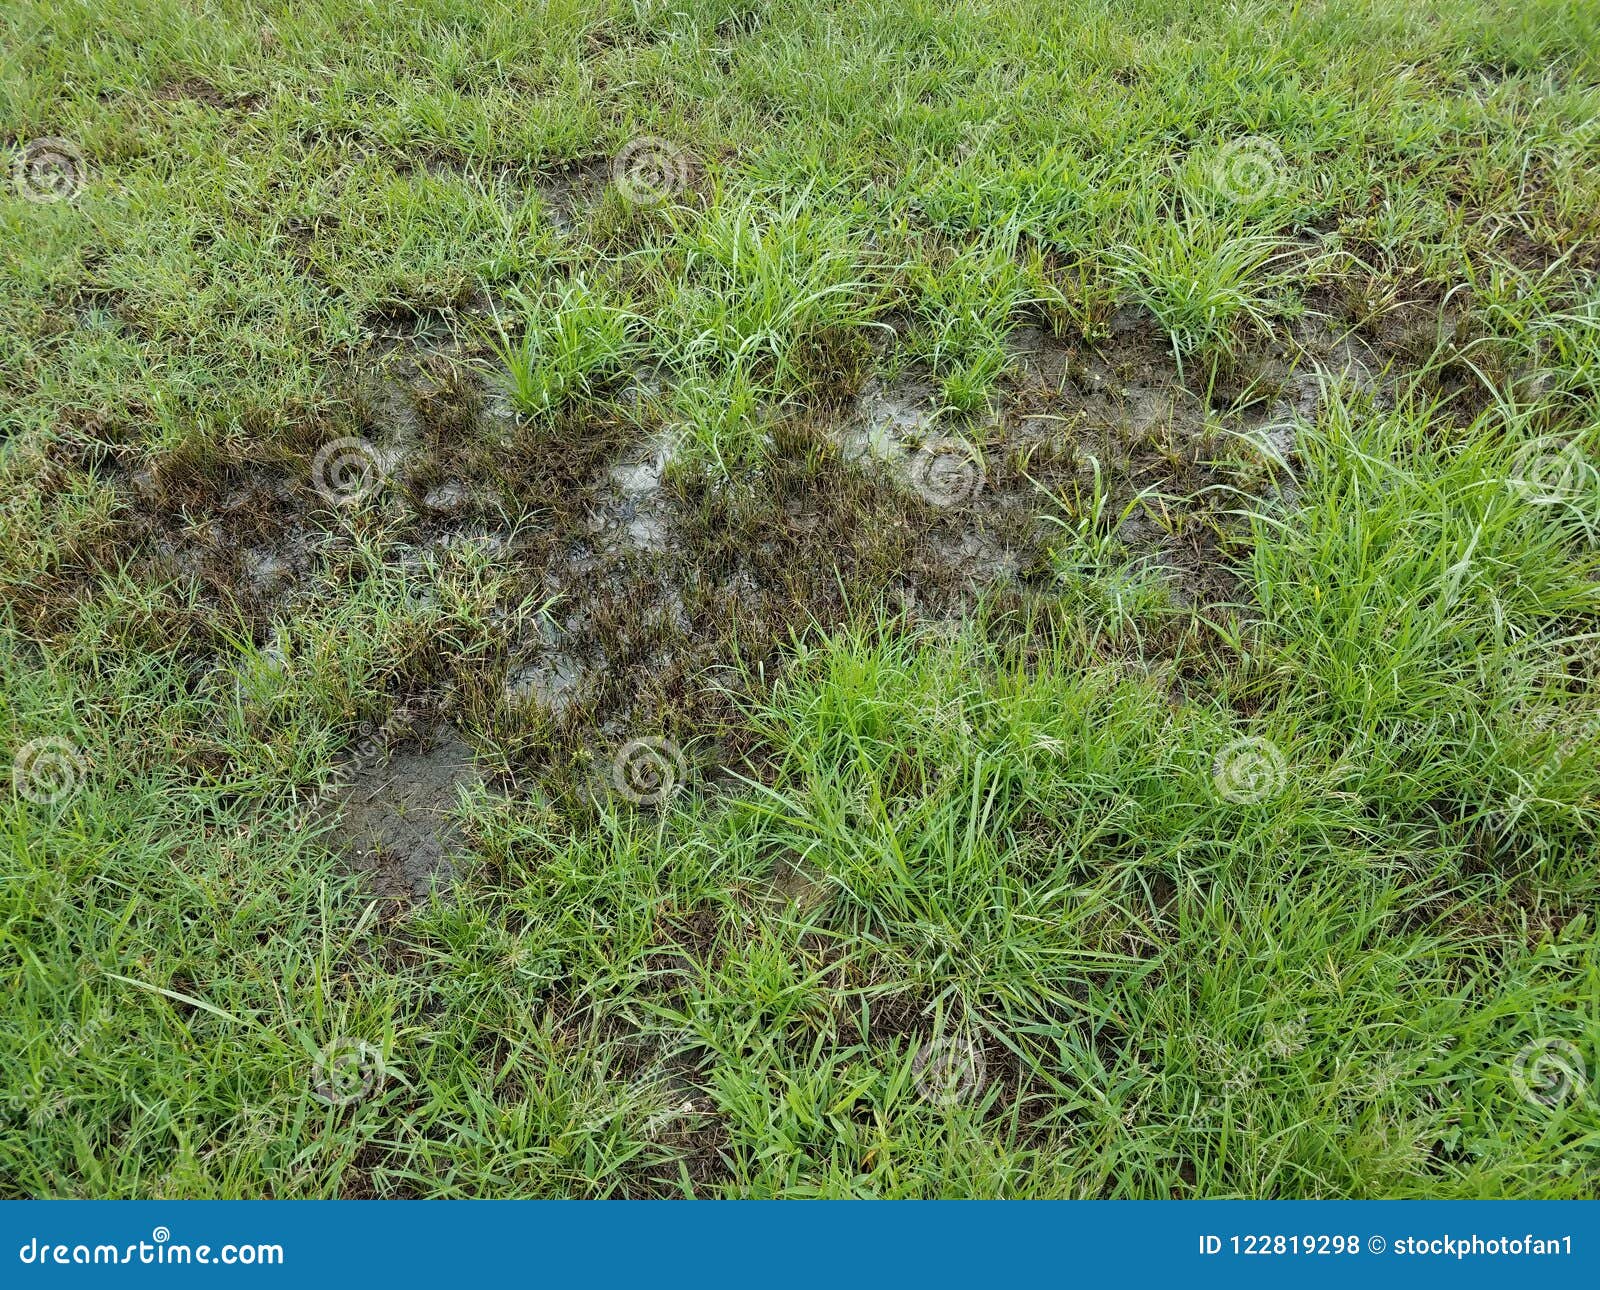 Dead Grass in Water and Mud with Green Grass Stock Photo - Image of dead,  muddy: 122819298